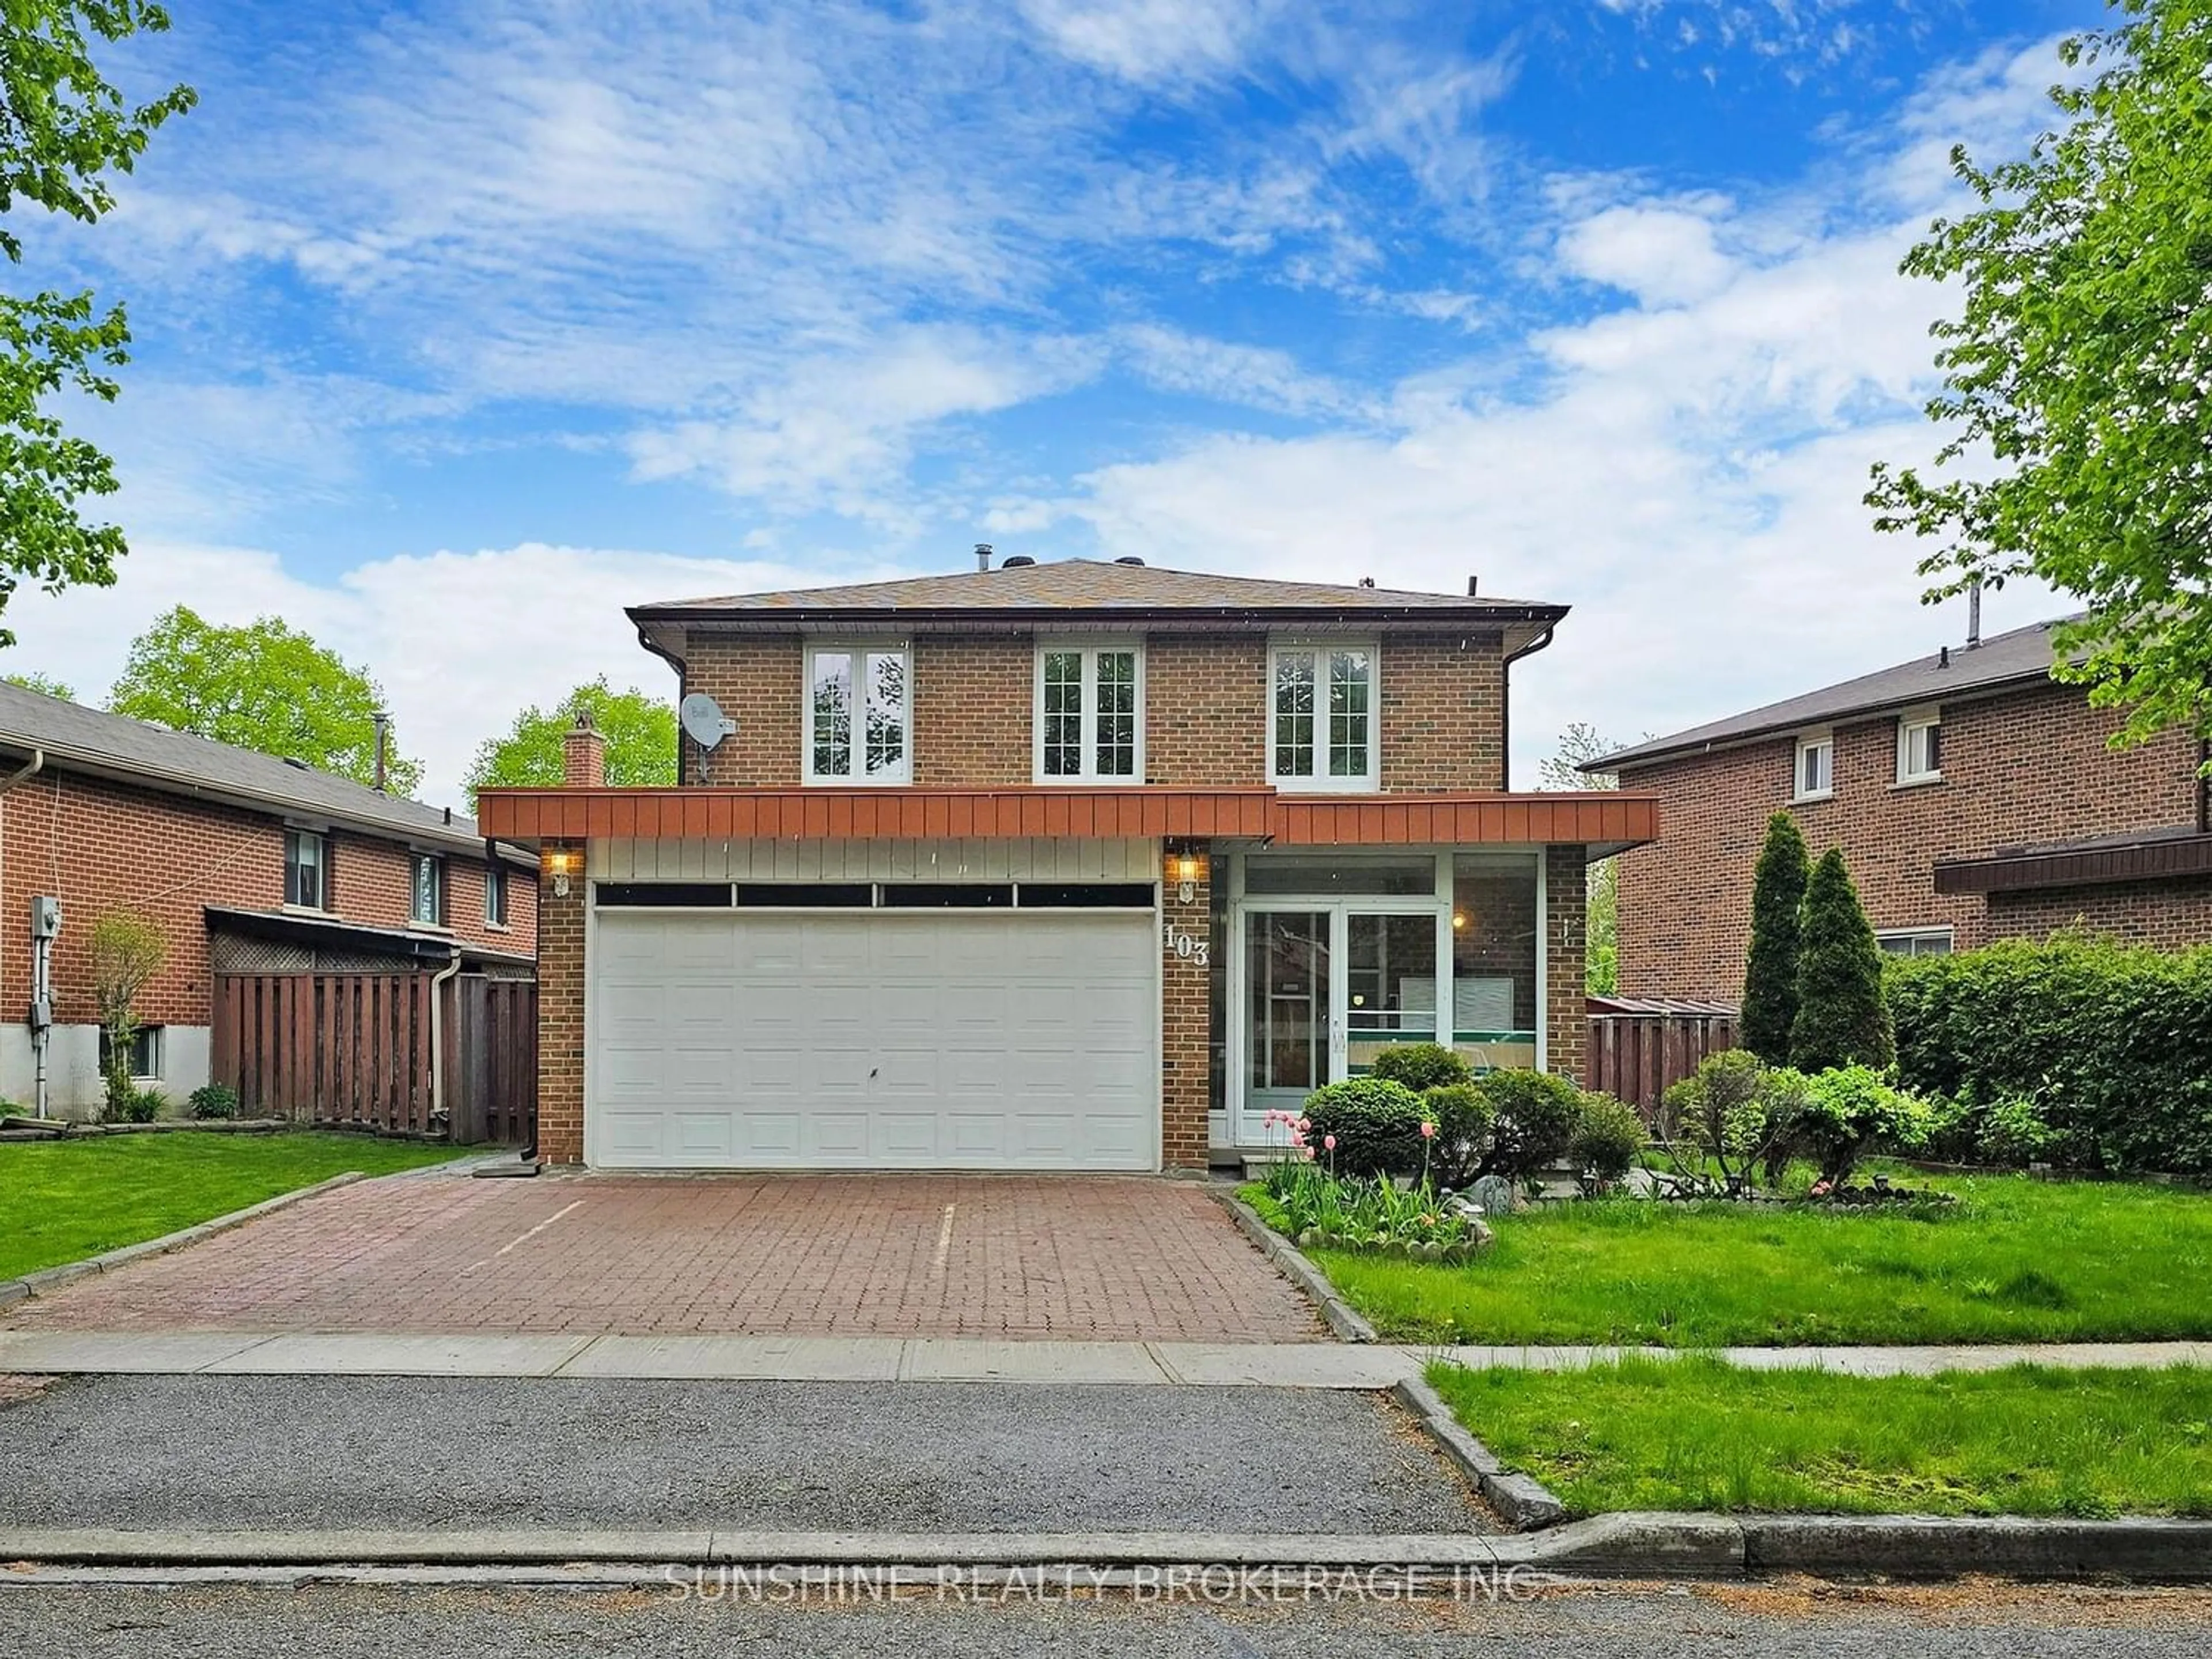 Home with brick exterior material for 103 Longmeadow Cres, Markham Ontario L3R 3J6